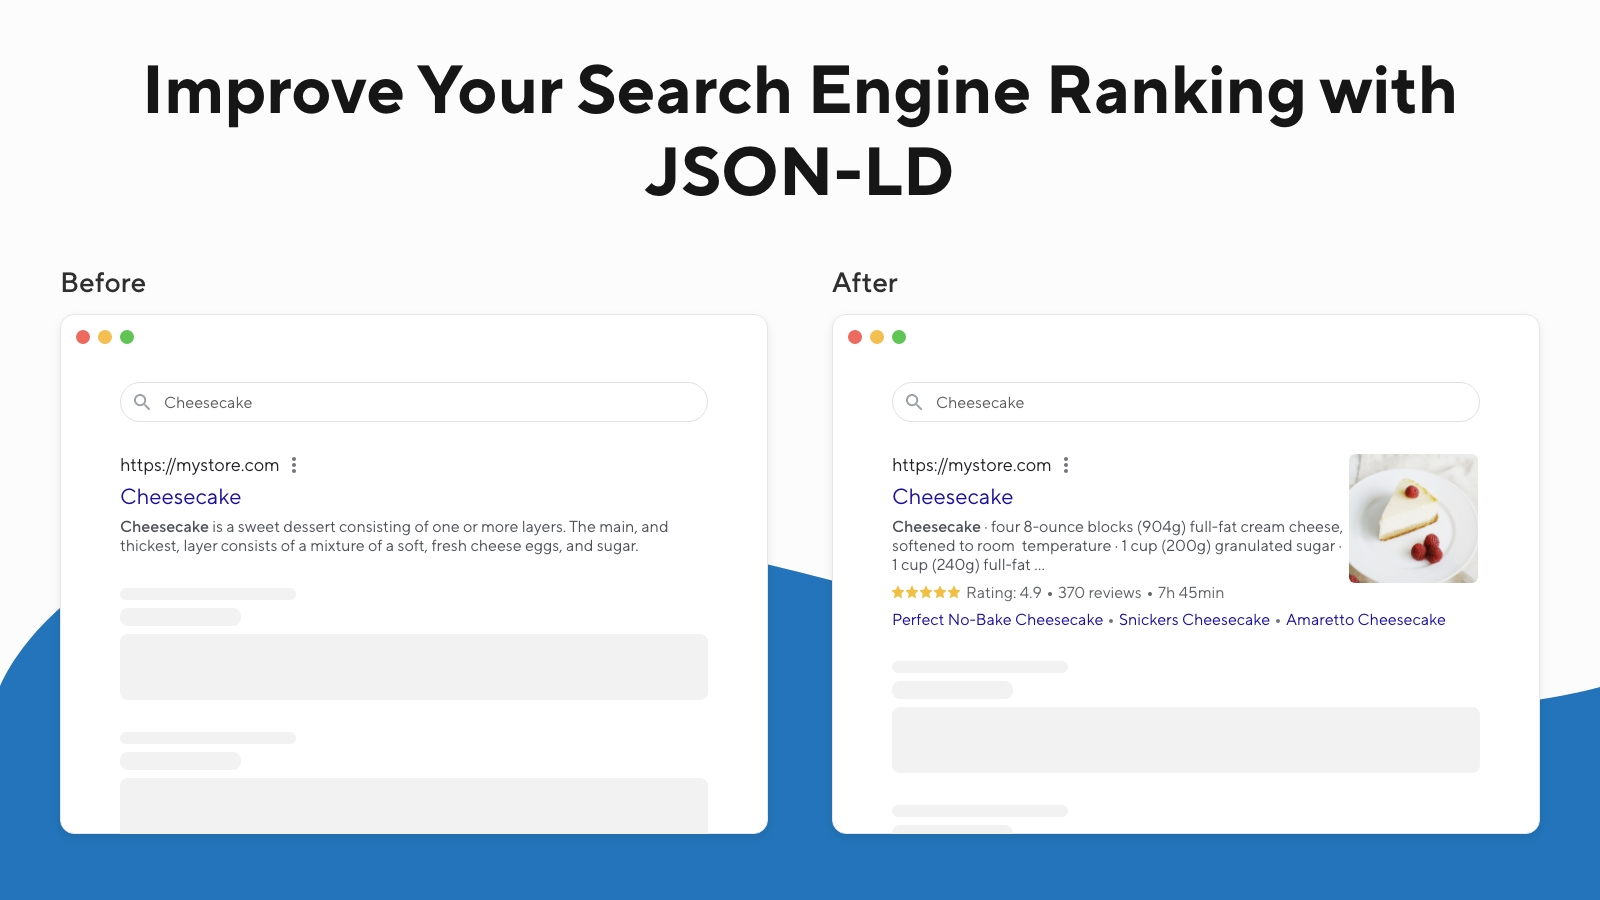 Improve search ranking with JSON-LD